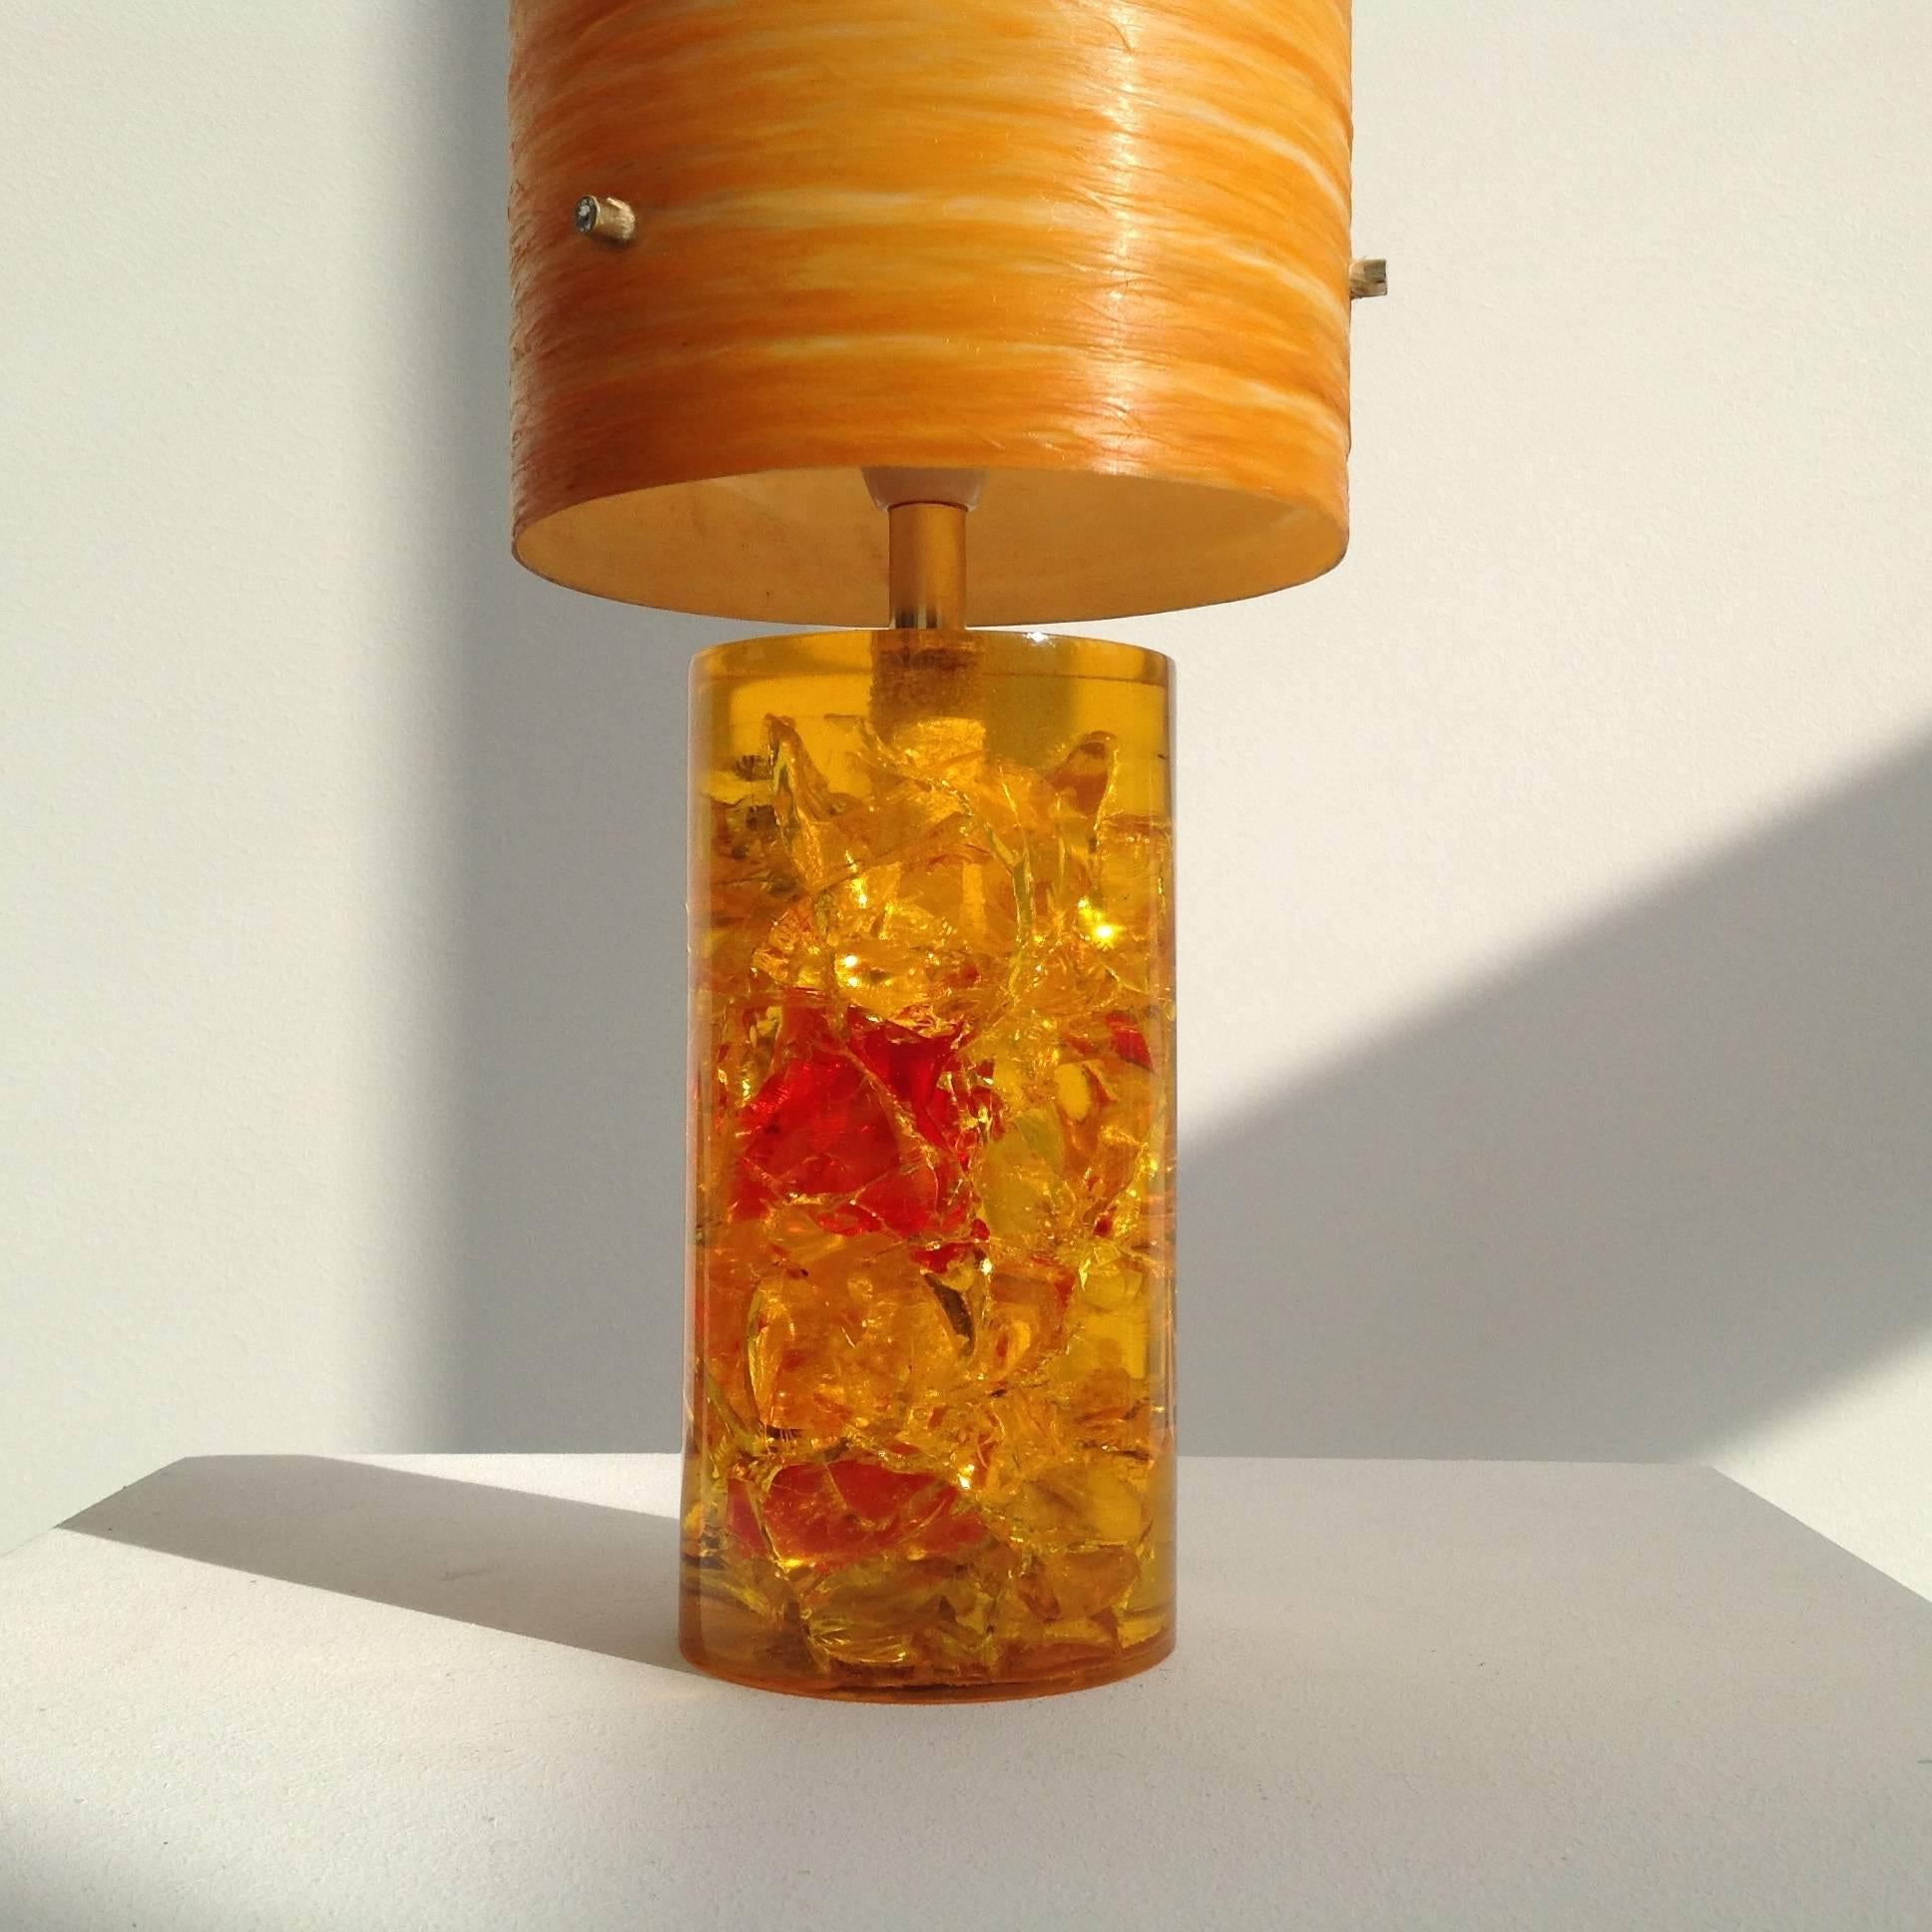 Very elegant and simple desk or table lamp, pretty line, special lighting.
Base made of orange crackle resin with red accents.
One bulb in a small French fitting, with on/off switch, controlled and okay for the US.
Lampshade in orange and made of